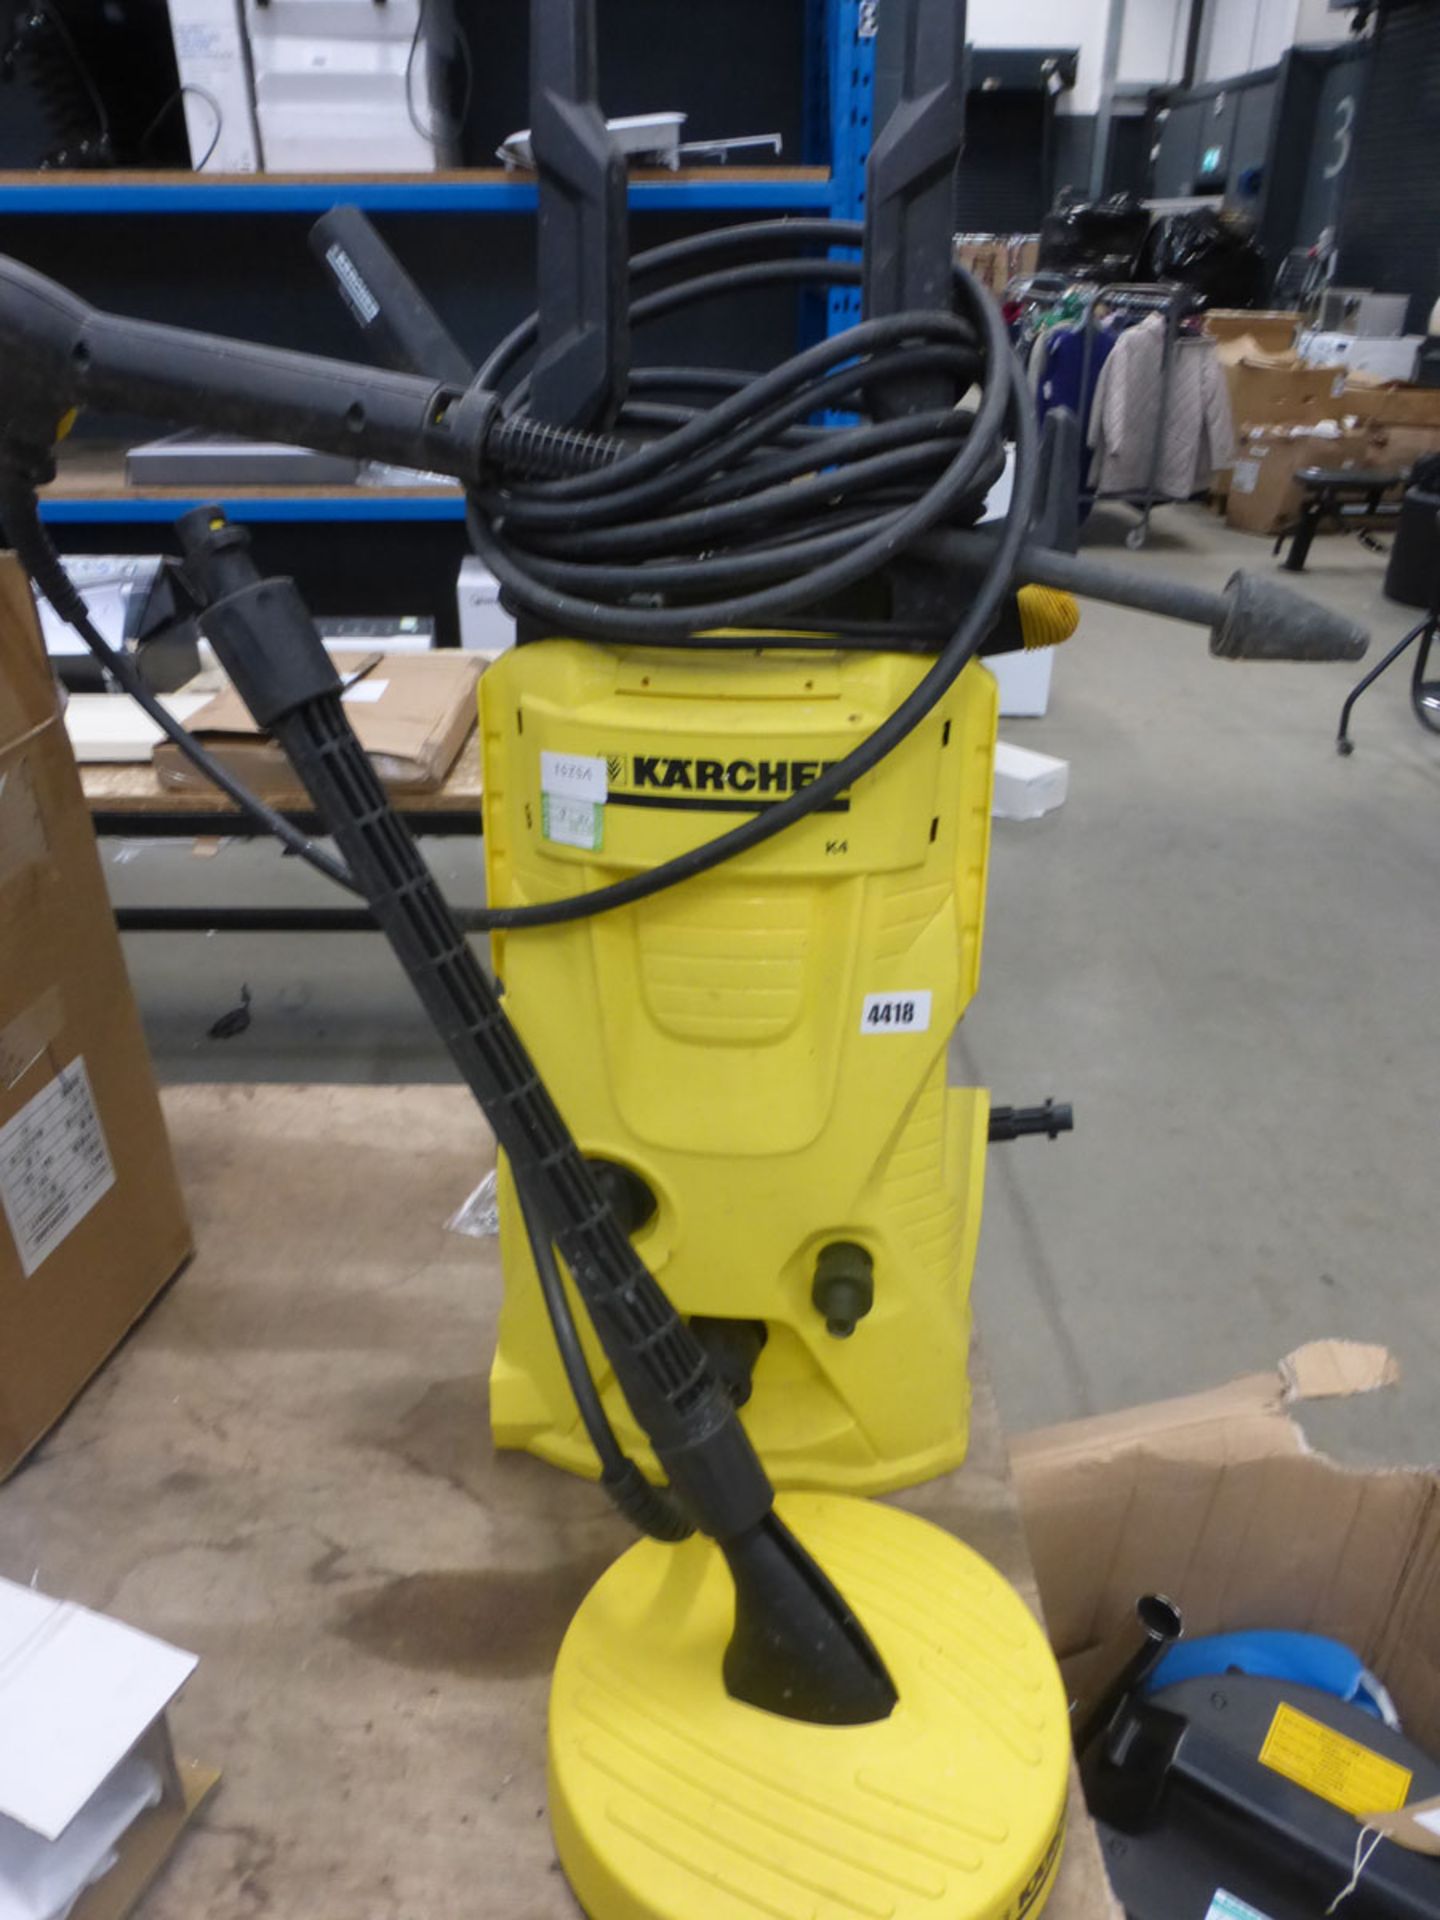 Karcher K4 electric pressure washer with patio cleaning head